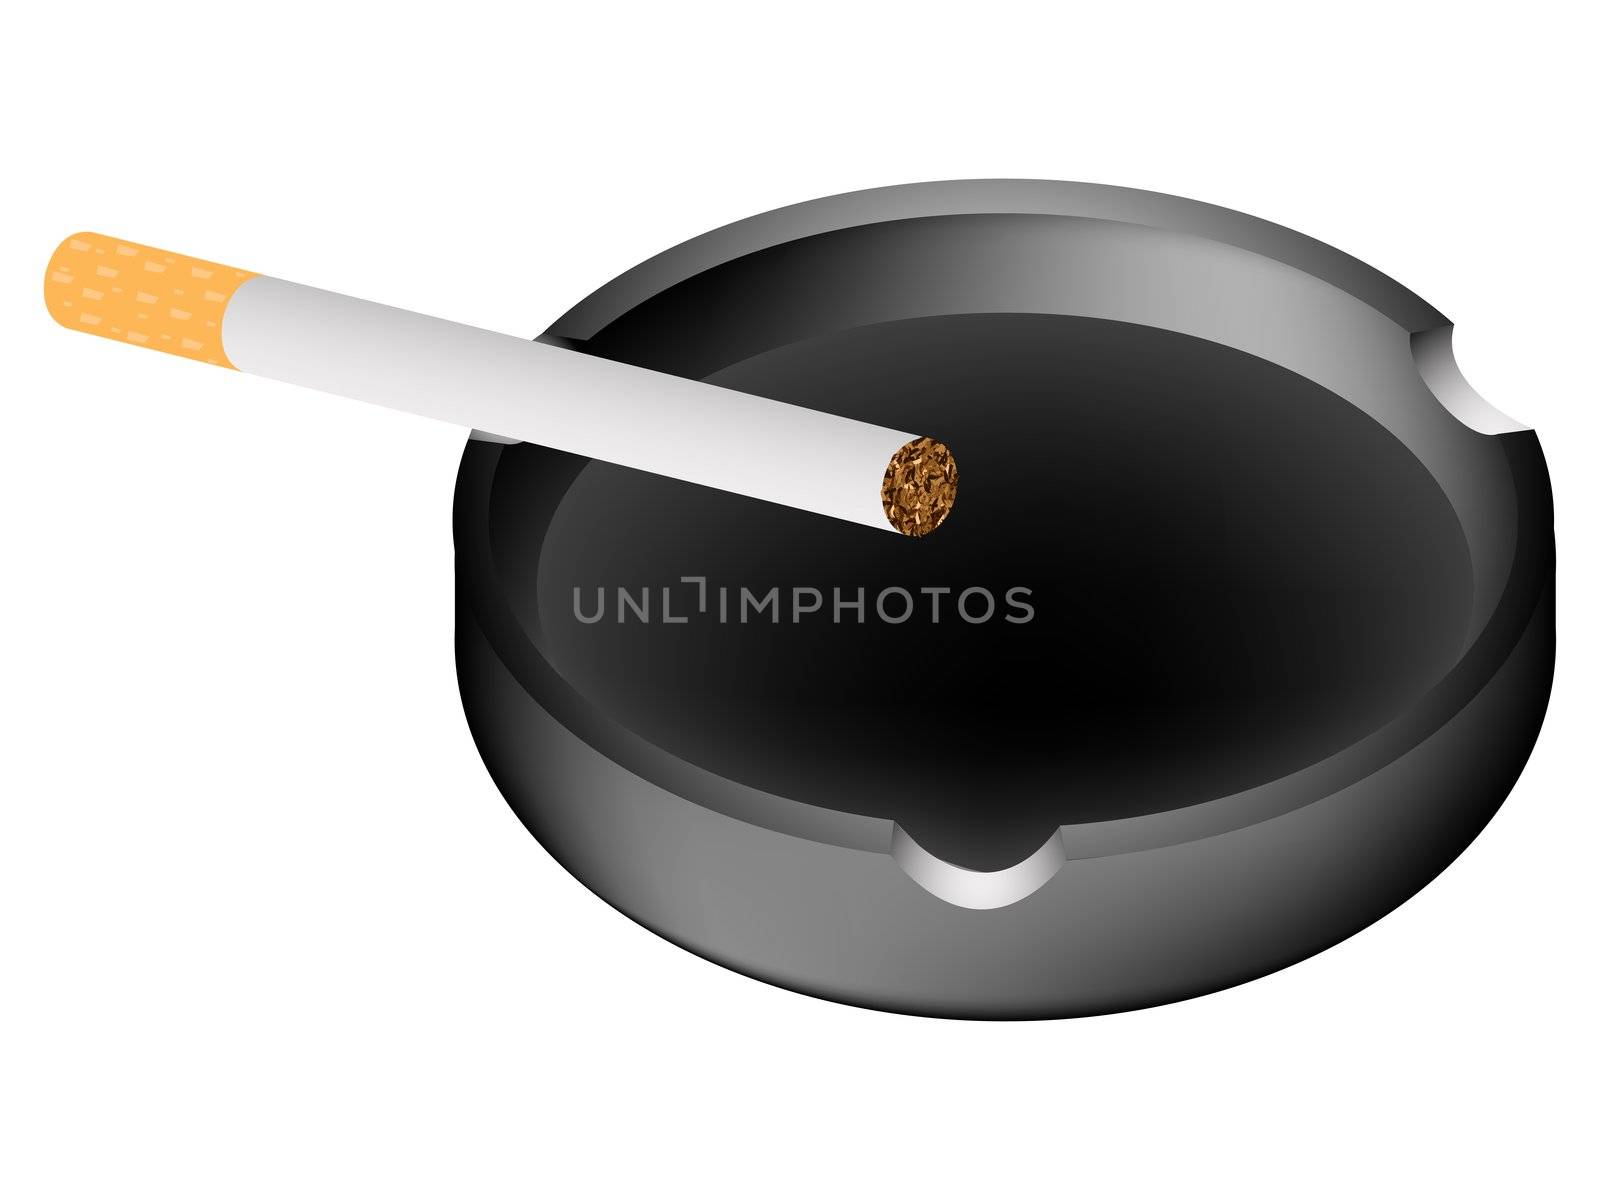 ashtray and cigarette against white by robertosch